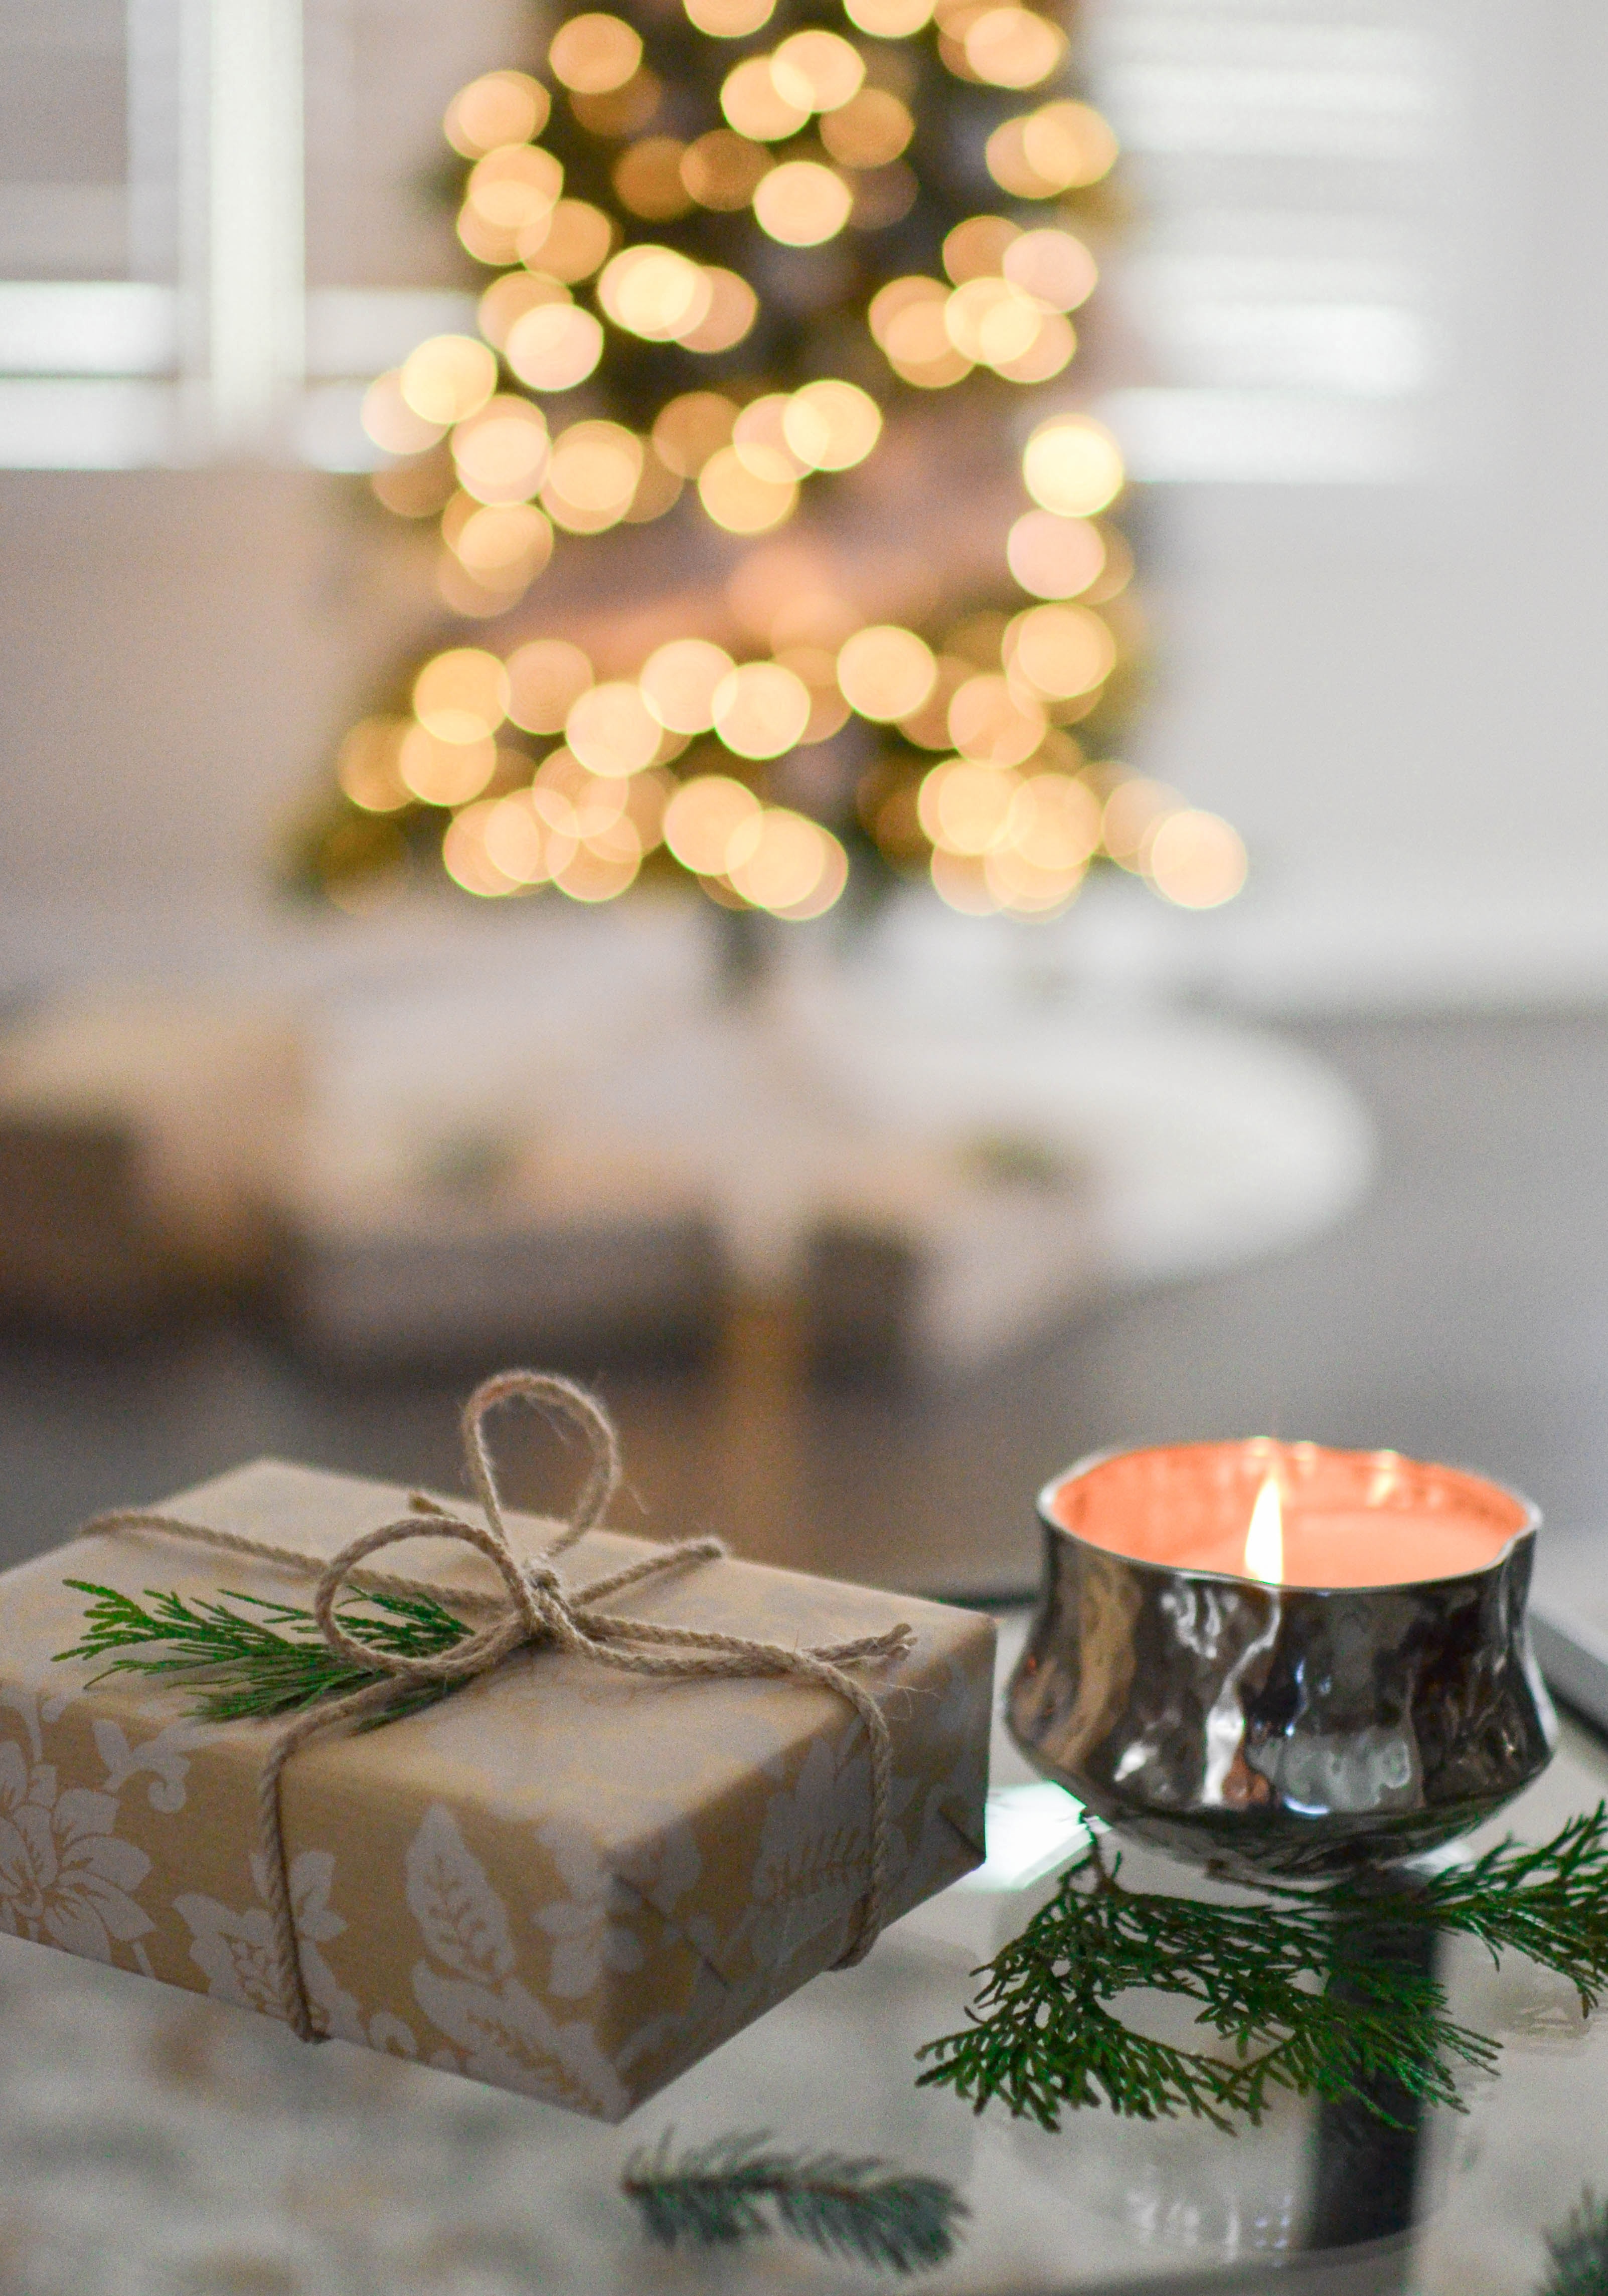 In the foreground, a wrapped gift tied with cord and decorated with a sprig of pine. Next to it, a candle in a small silver container burns with a pink glow. In the background is a lit and decorated tree with more gifts underneath it.